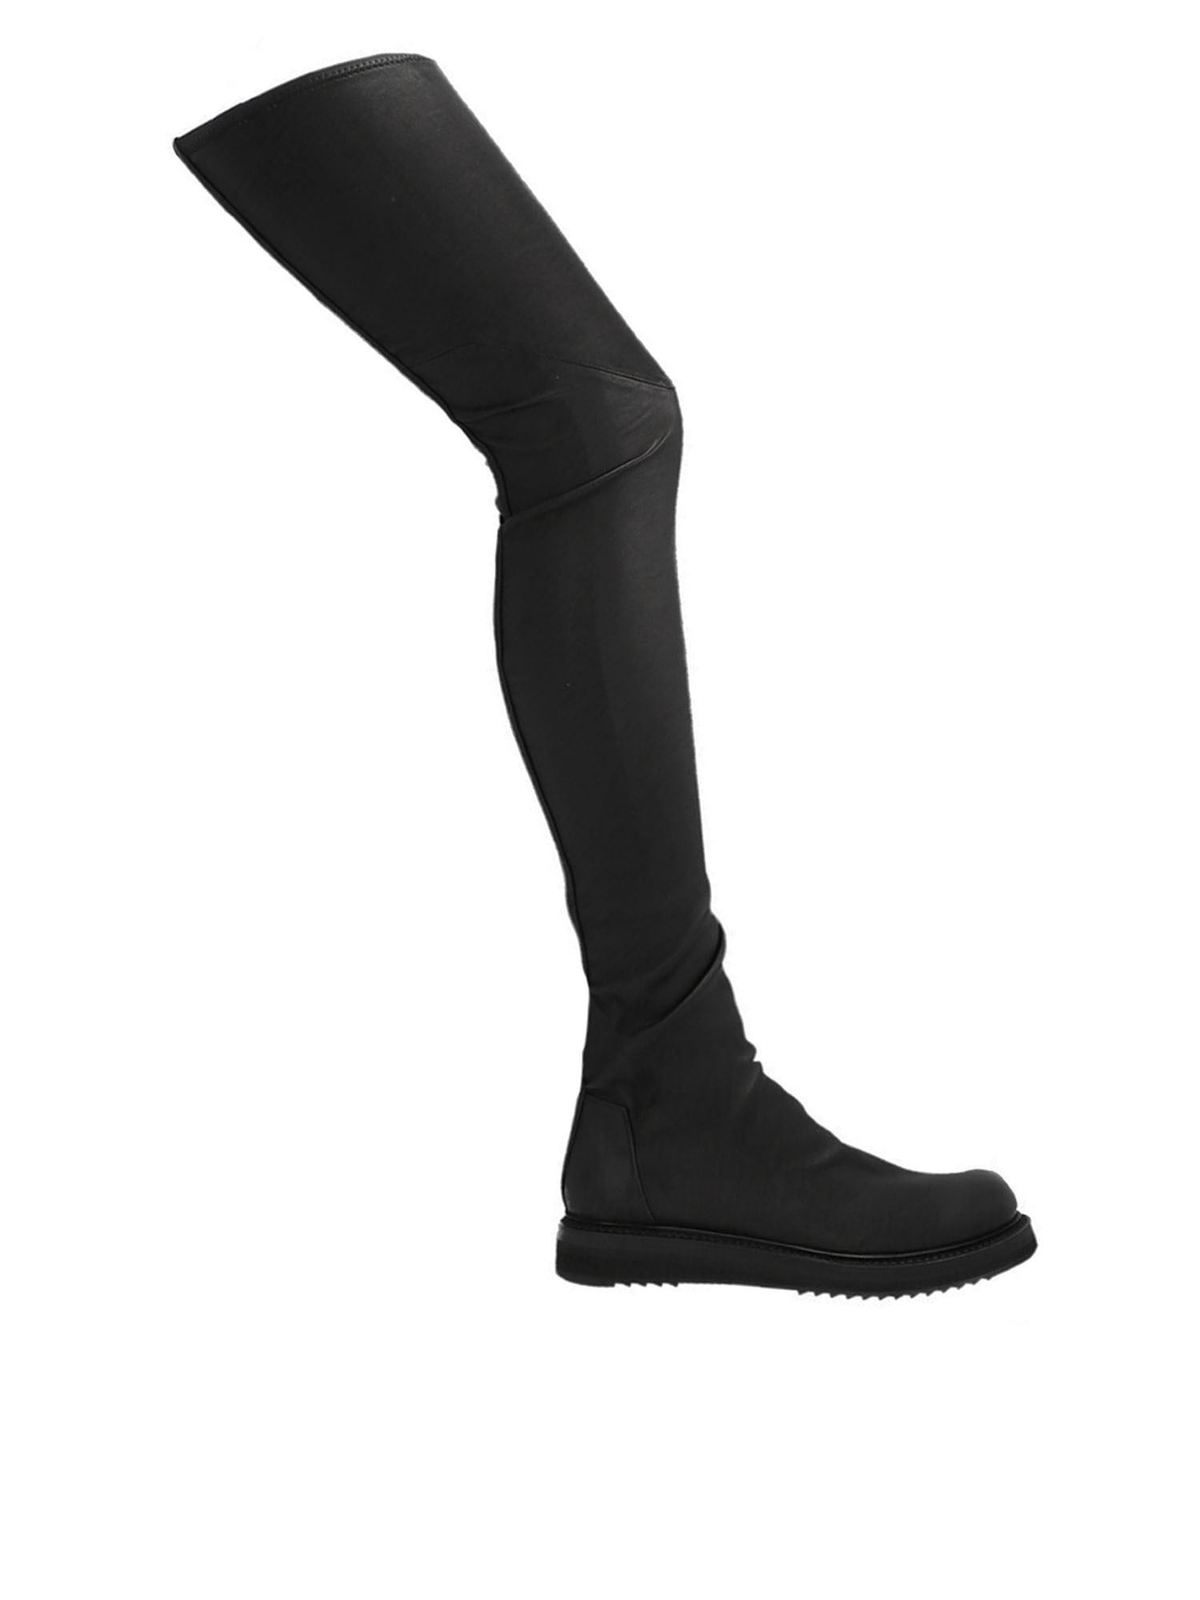 RICK OWENS CREEPER STOCKING HIGH BOOTS IN BLACK